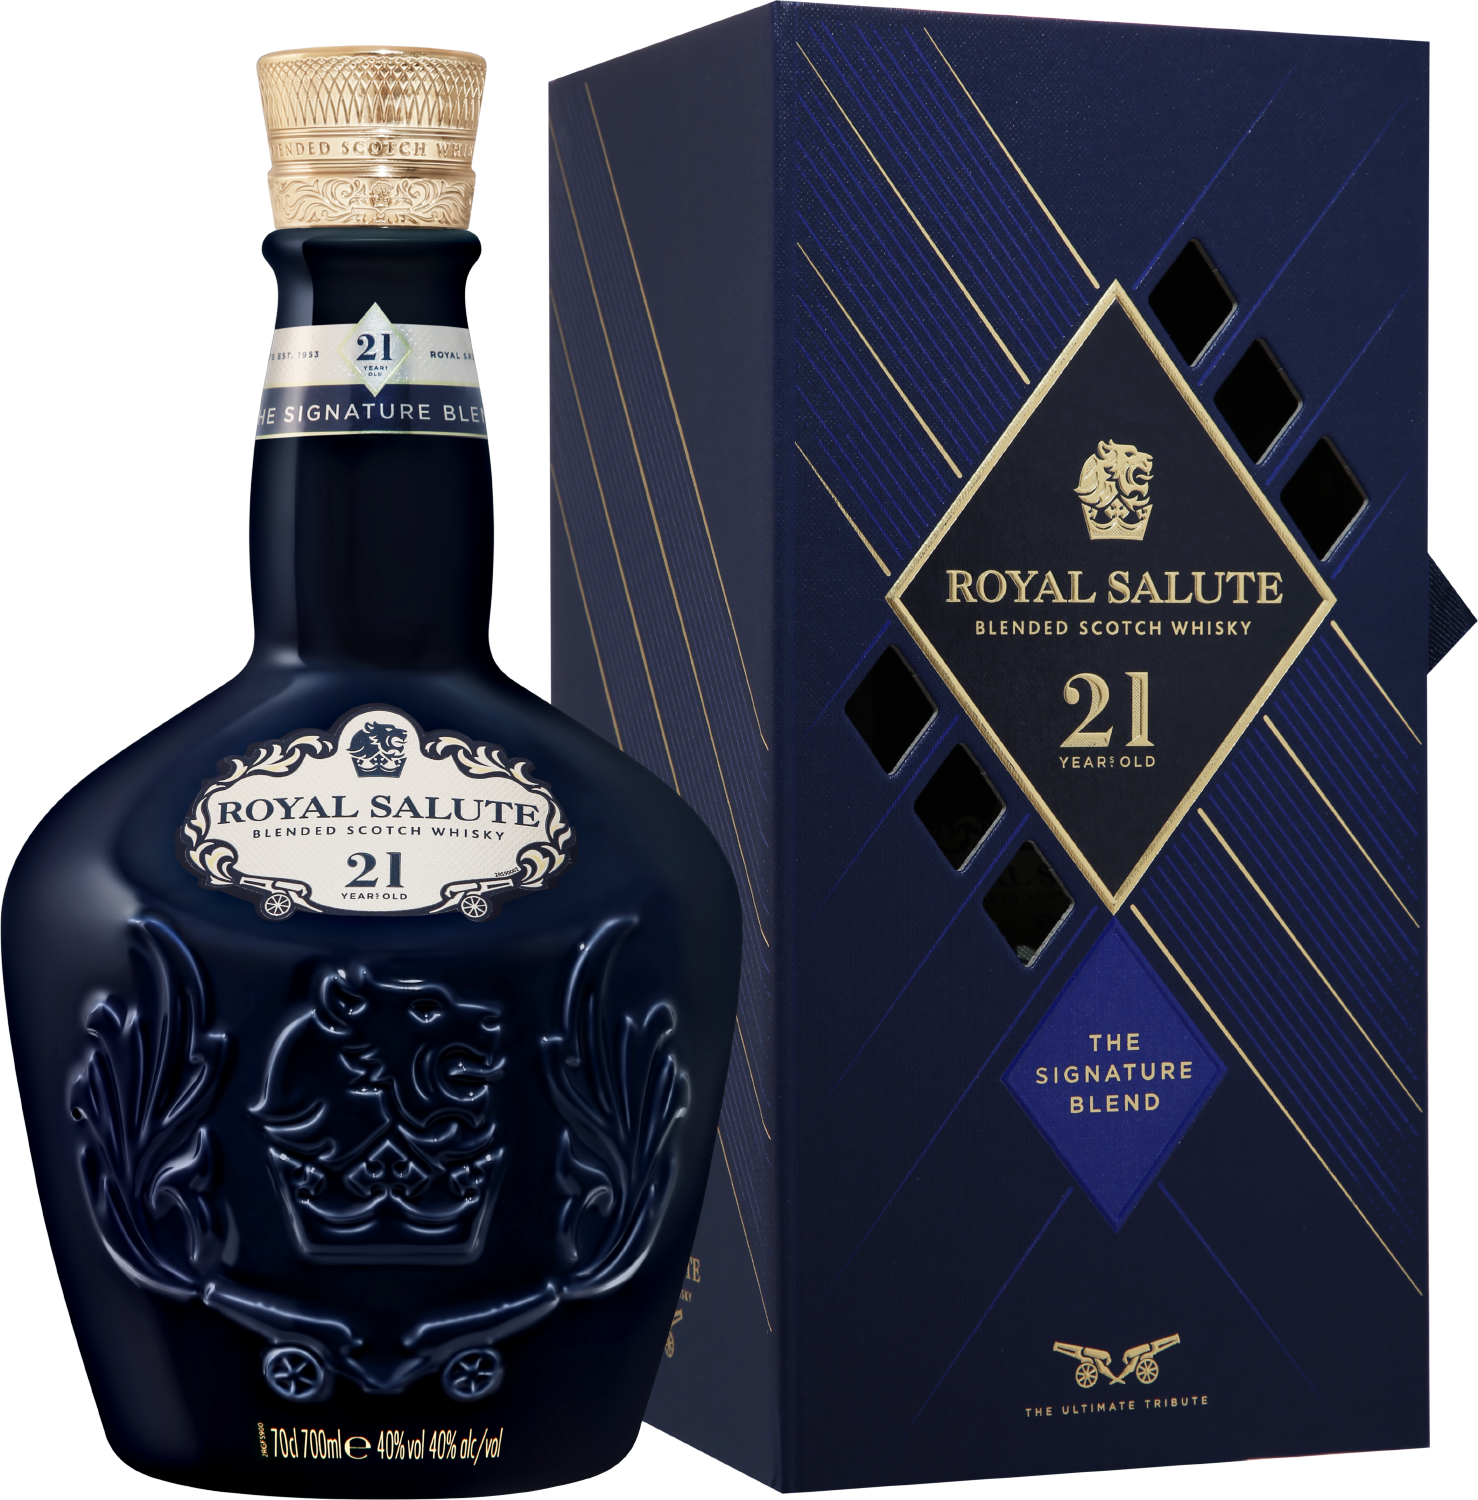 Royal Salute Blended Scotch Whisky 21 y.o.(gift box)